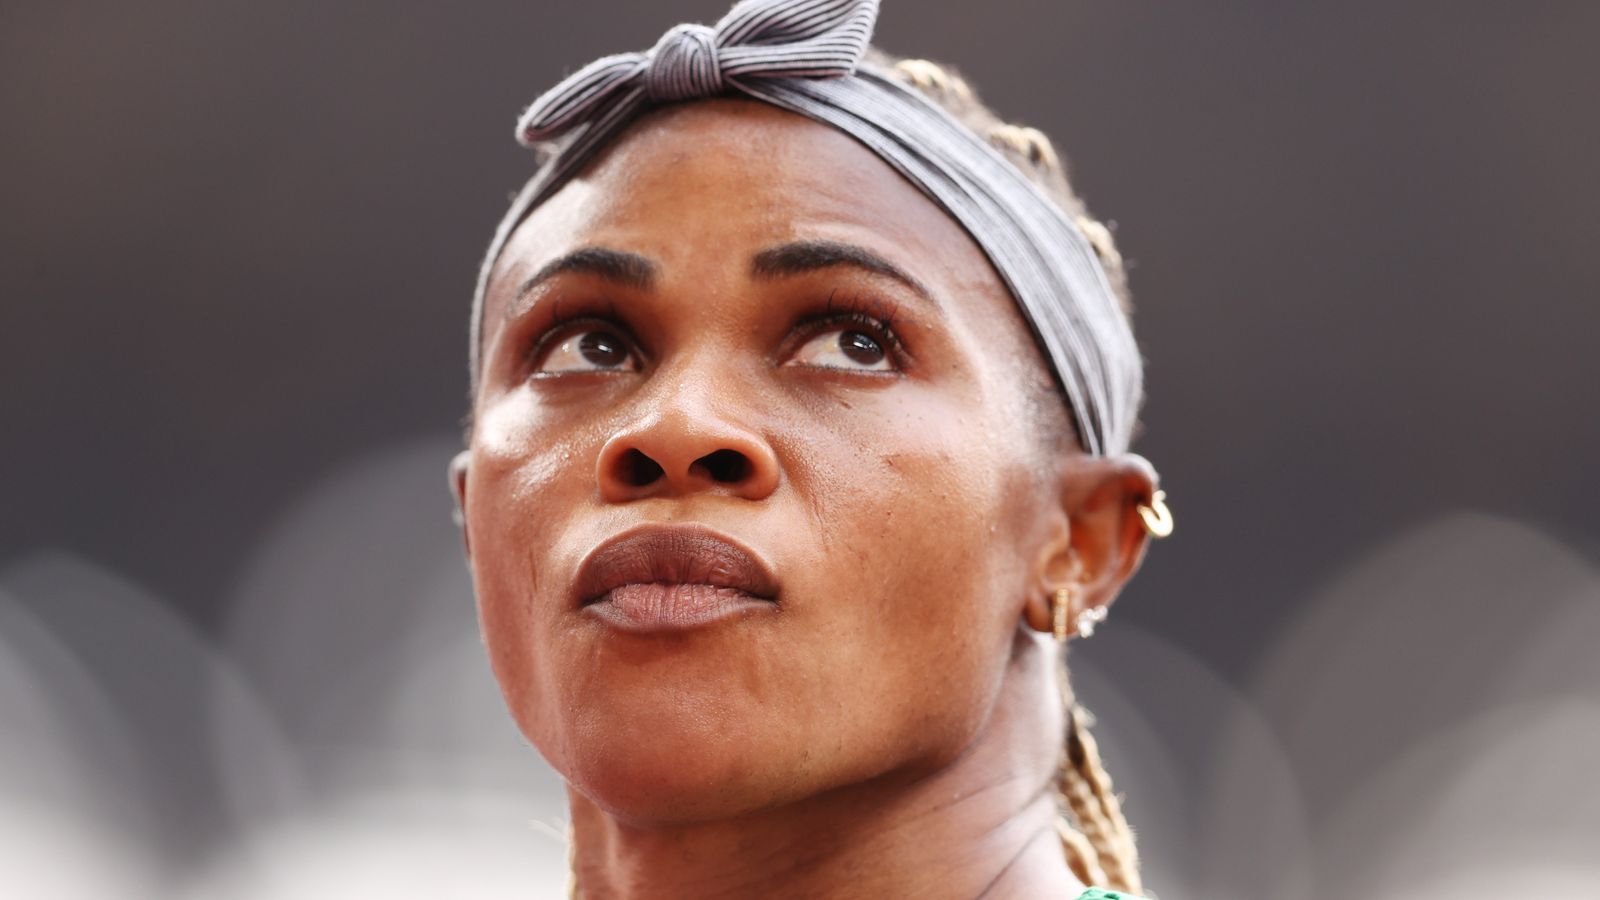 Tokyo 2020 Olympics: Blessing Okagbare provisionally suspended for failed drugs test